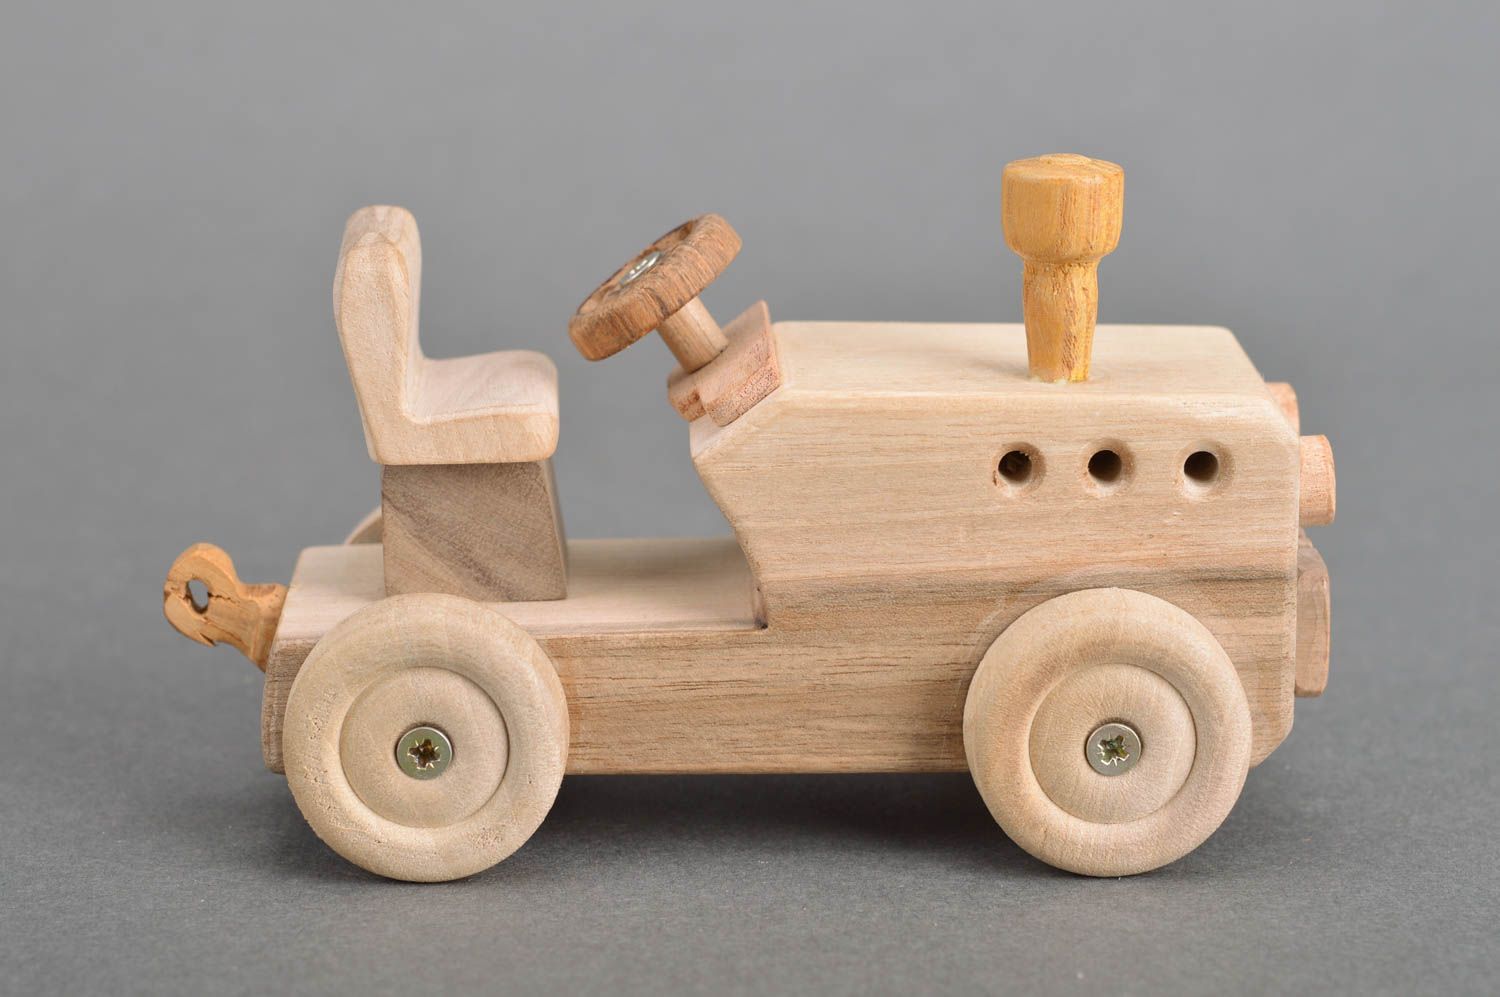 Handmade eco friendly large light wooden toy car for children over 6 